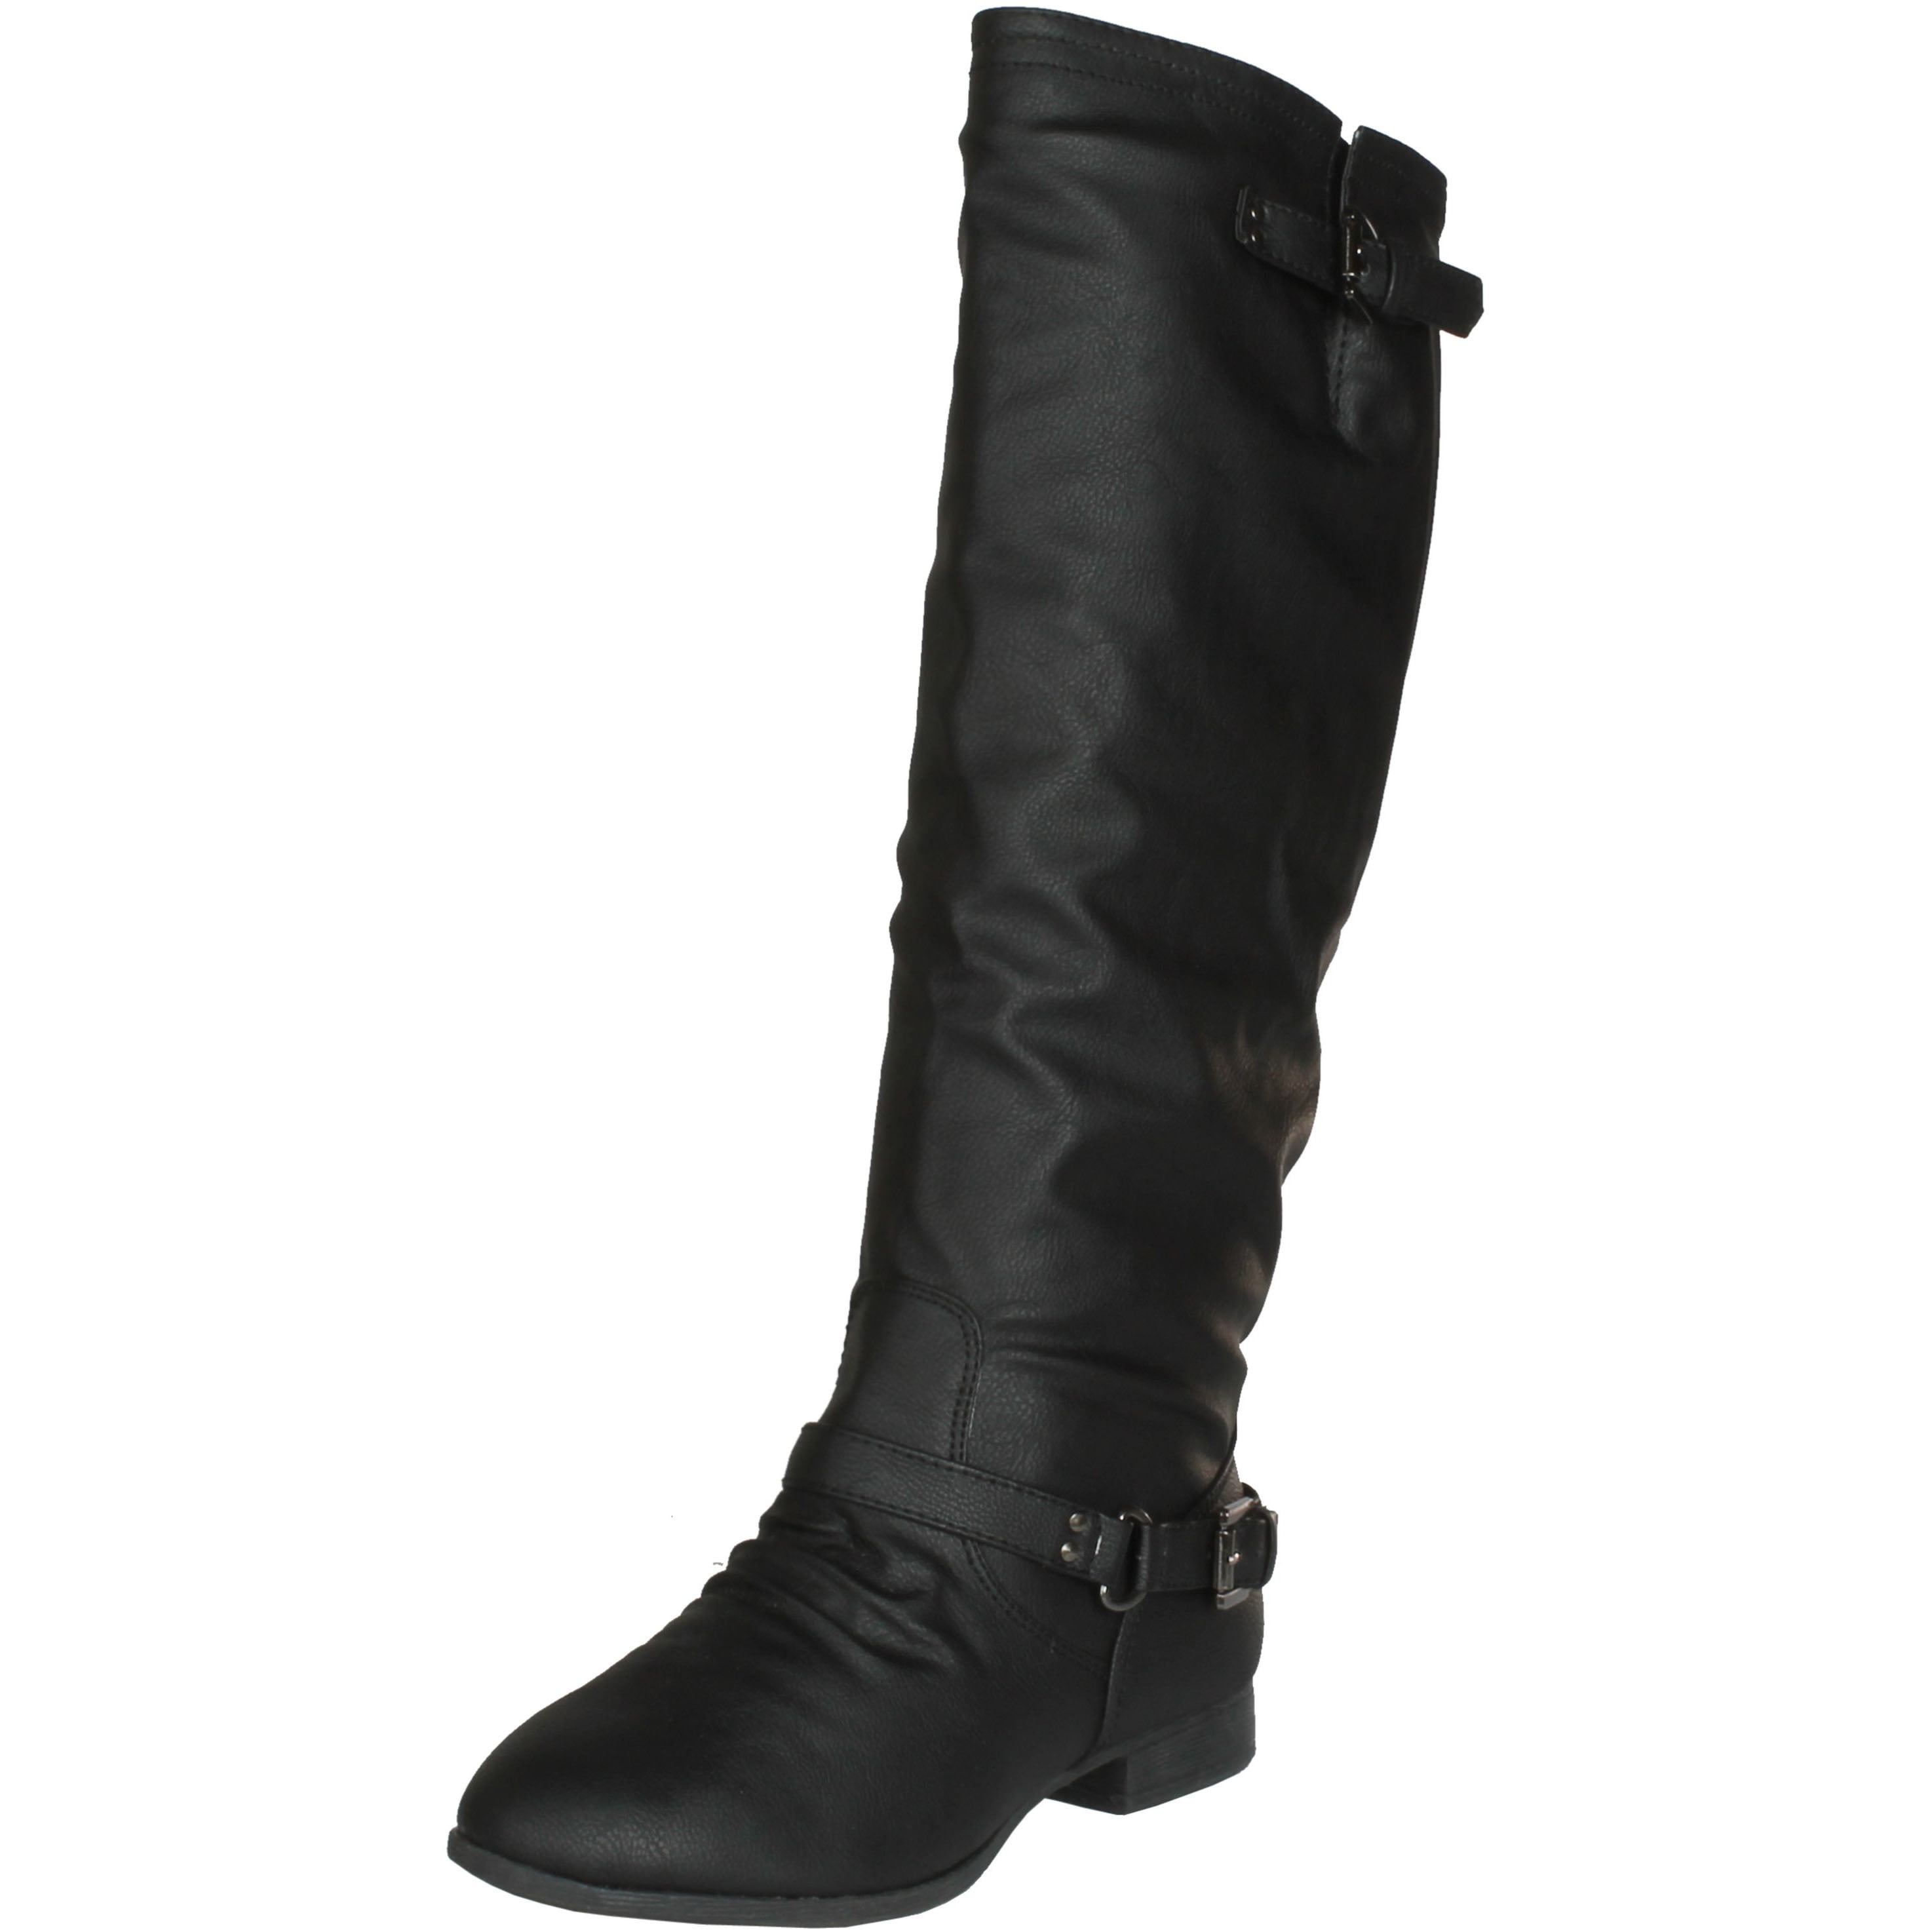 Cambridge Select Womens Slouchy Fold-Over Cuff Thigh-High Over The Knee Low Heel Boot